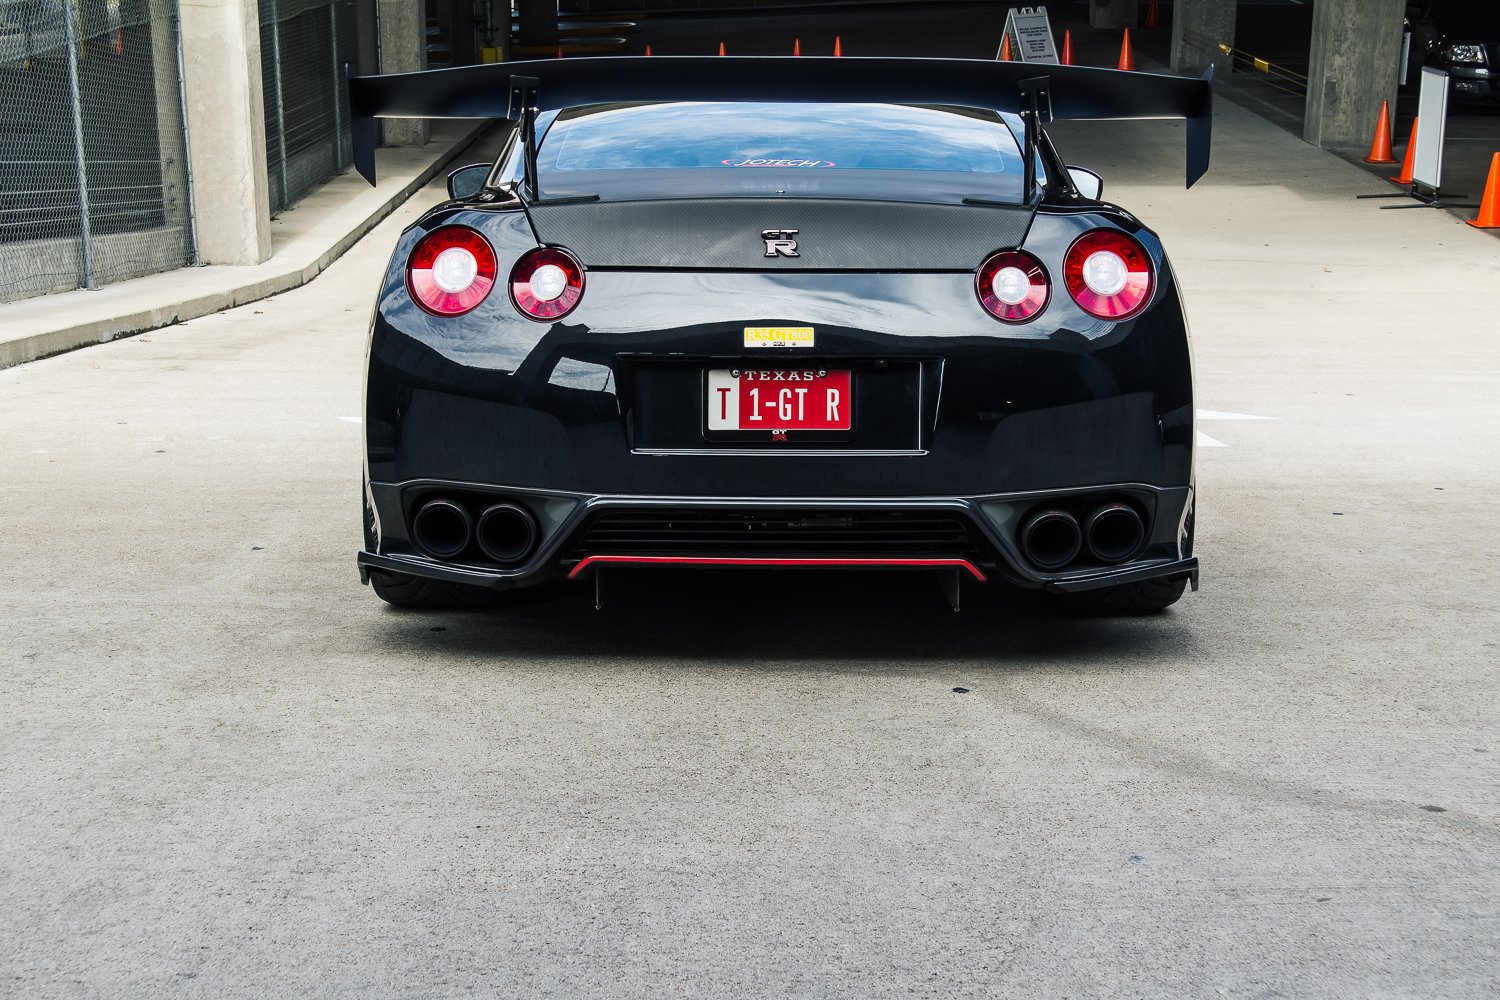 nissan, Gt r, Jotech, Stage, 6 s, Coupe, Cars, Modified Wallpaper